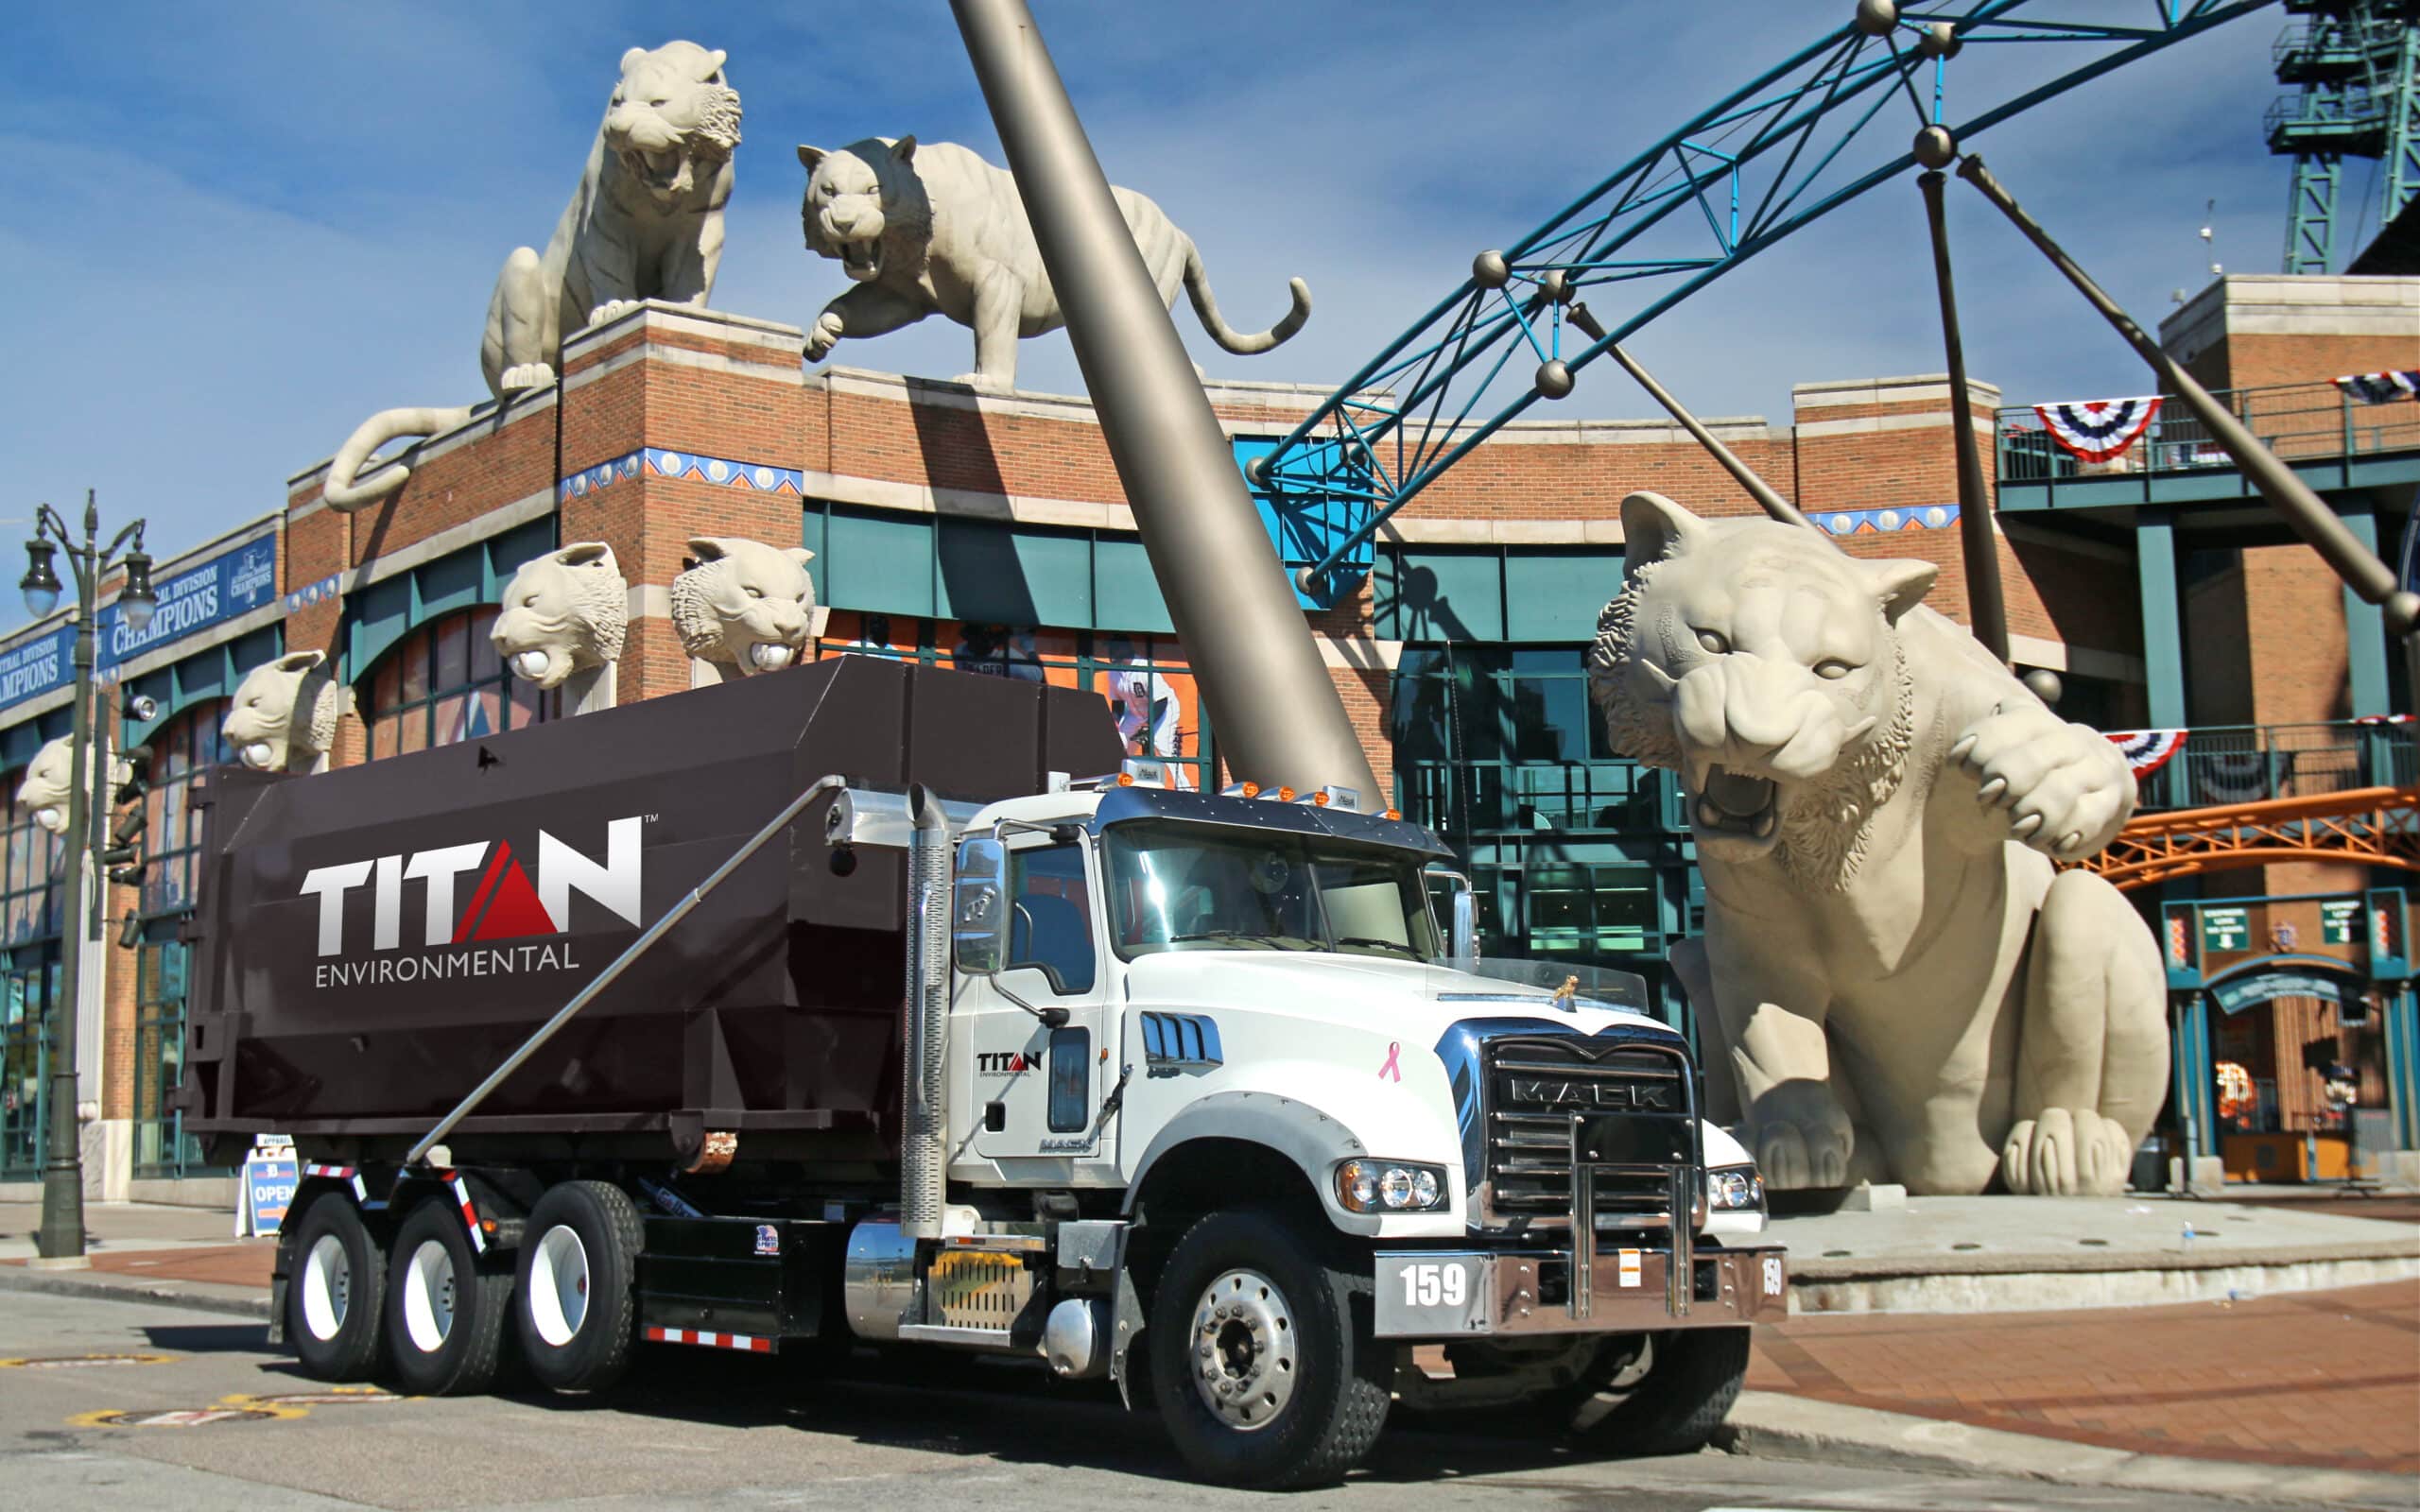 Titan Environmental Roll off Dumpster Truck in front of Comerica Park, Detroit Michigan.